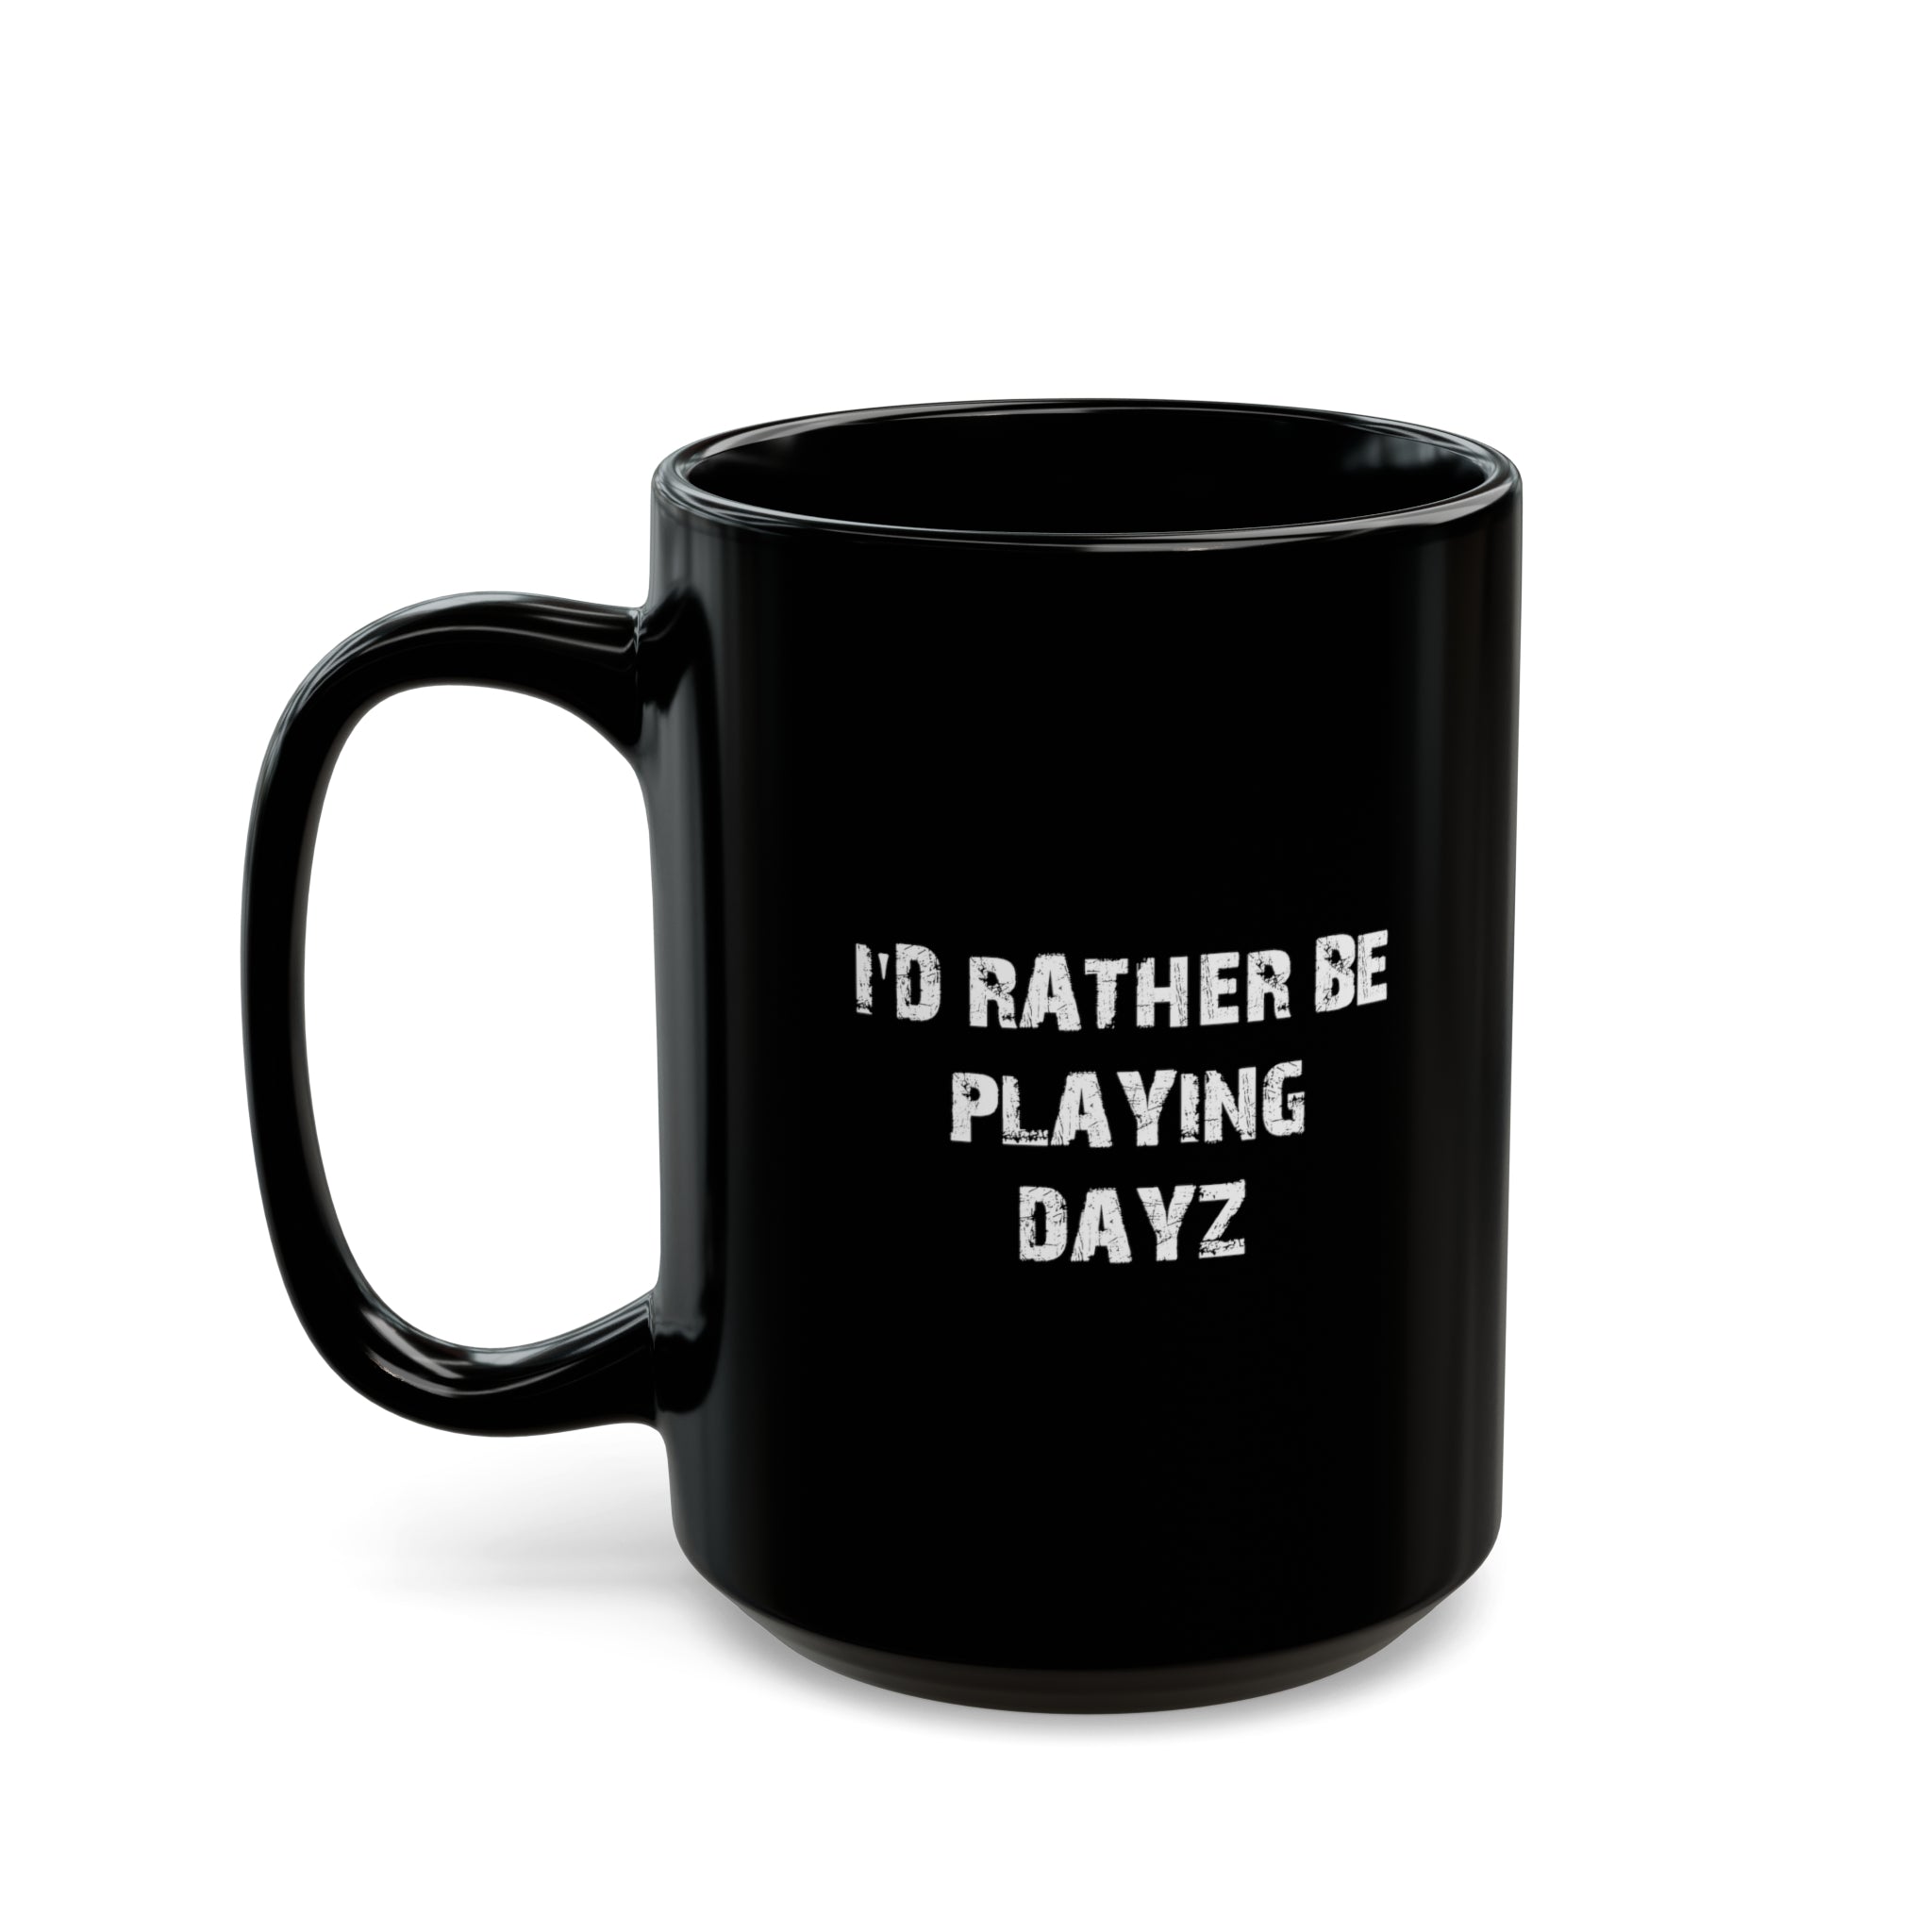 Dayz I'd Rather Be Playing Black Mug (11oz, 15oz) cups mugs cup Gamer Gift For Him Her Game Cup Cups Mugs Birthday Christmas Valentine's Anniversary Gifts